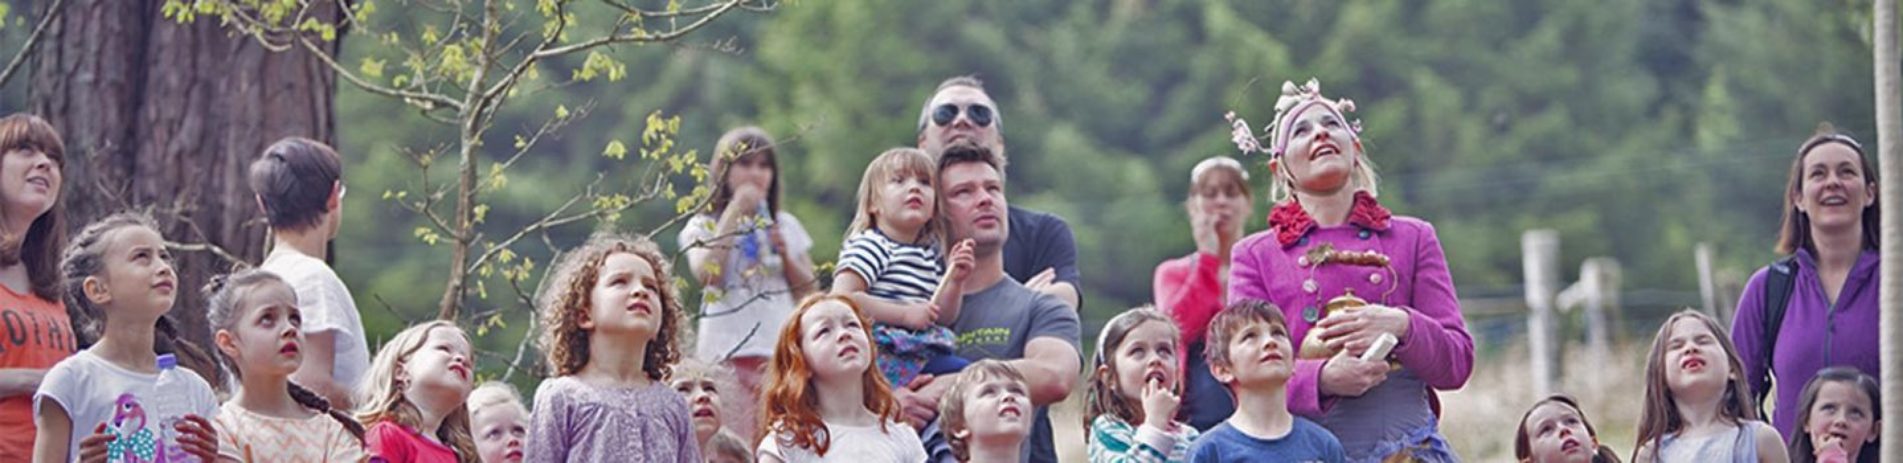 young-children-and-a-few-parents-all-looking-up-curious-mhor-festival